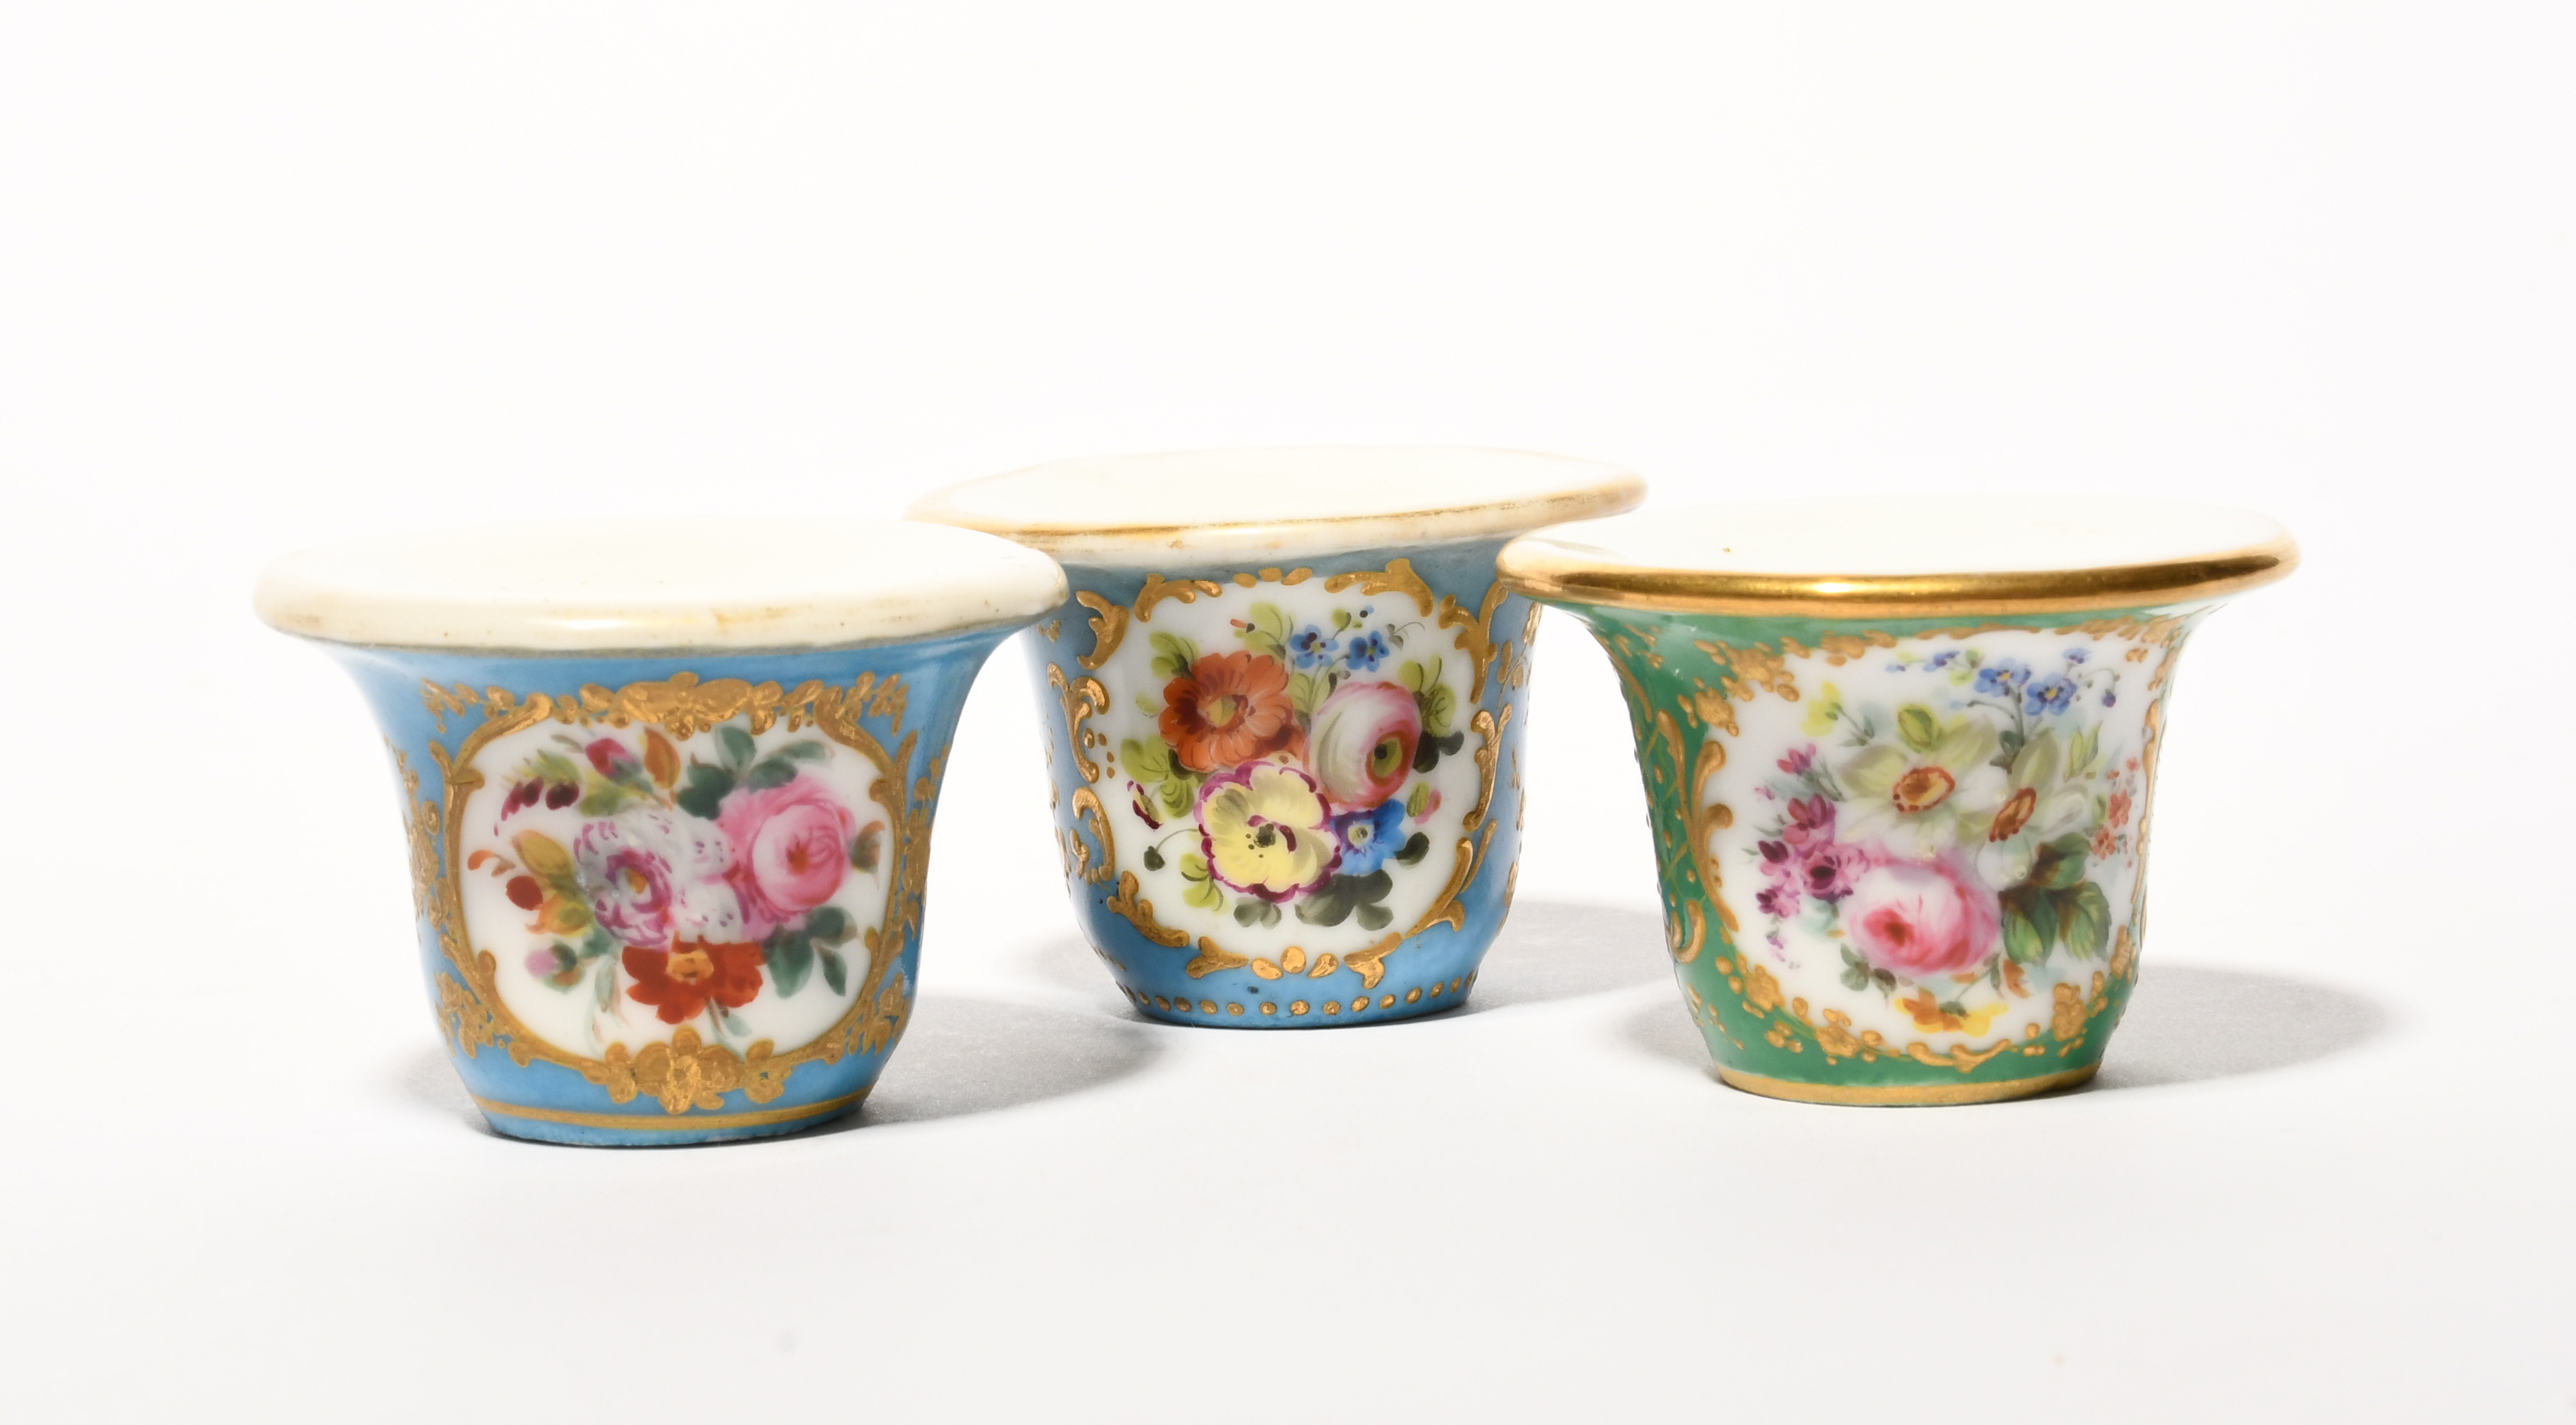 Three Paris porcelain rouge pots, c.1830, possibly Jacob Petit, one painted with a seated pastoral - Image 2 of 2